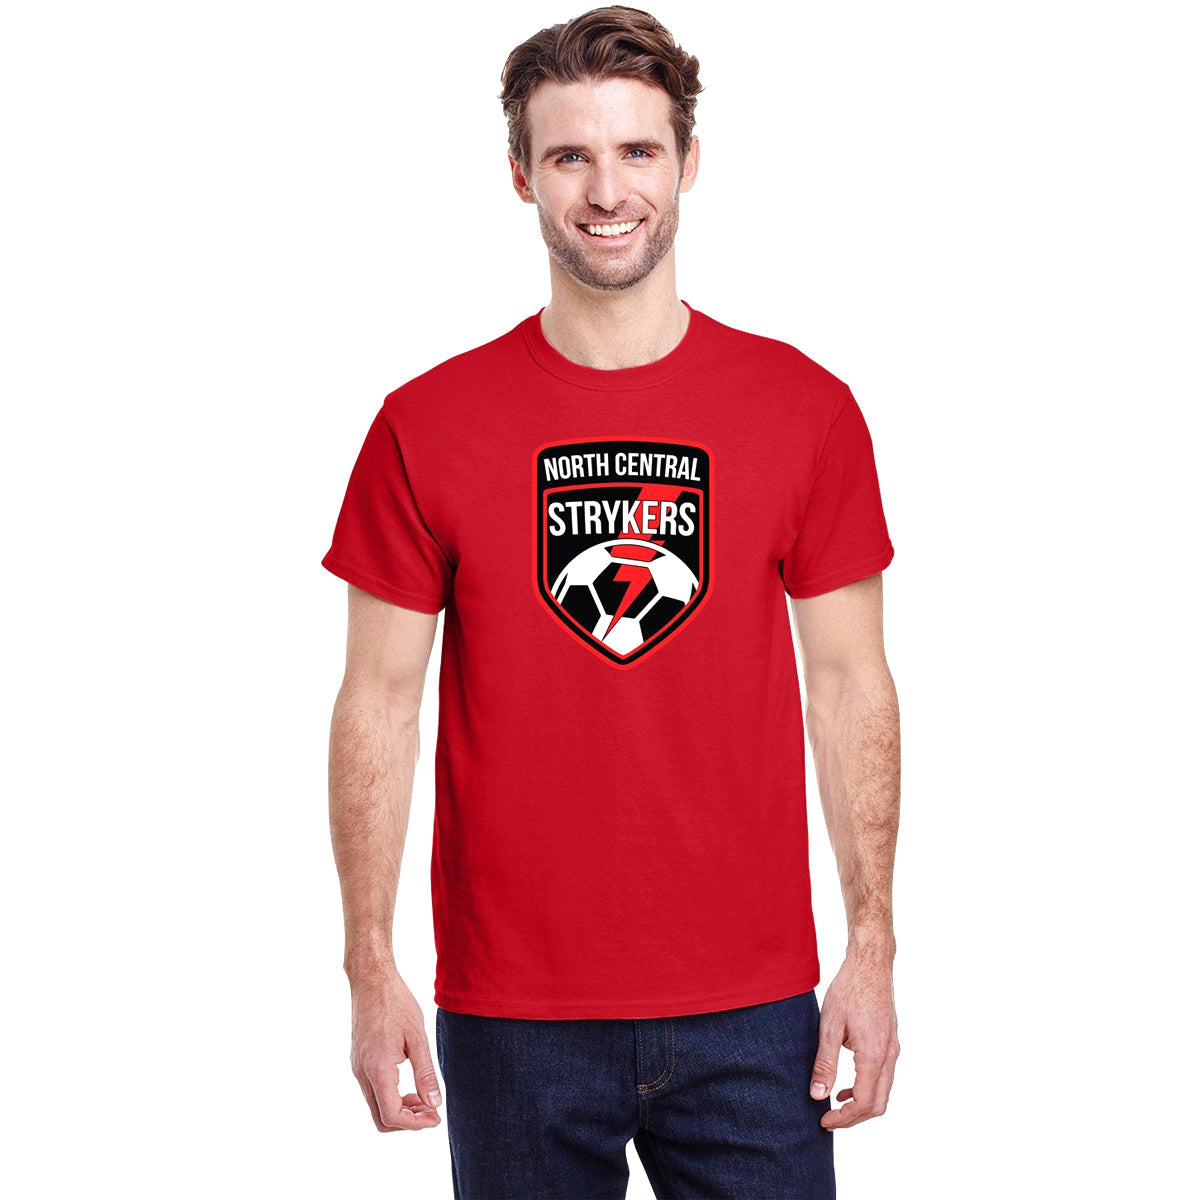 North Central Strykers Ultra Cotton Shortsleeve T-Shirt Apparel Goal Kick Soccer Youth Medium Red 